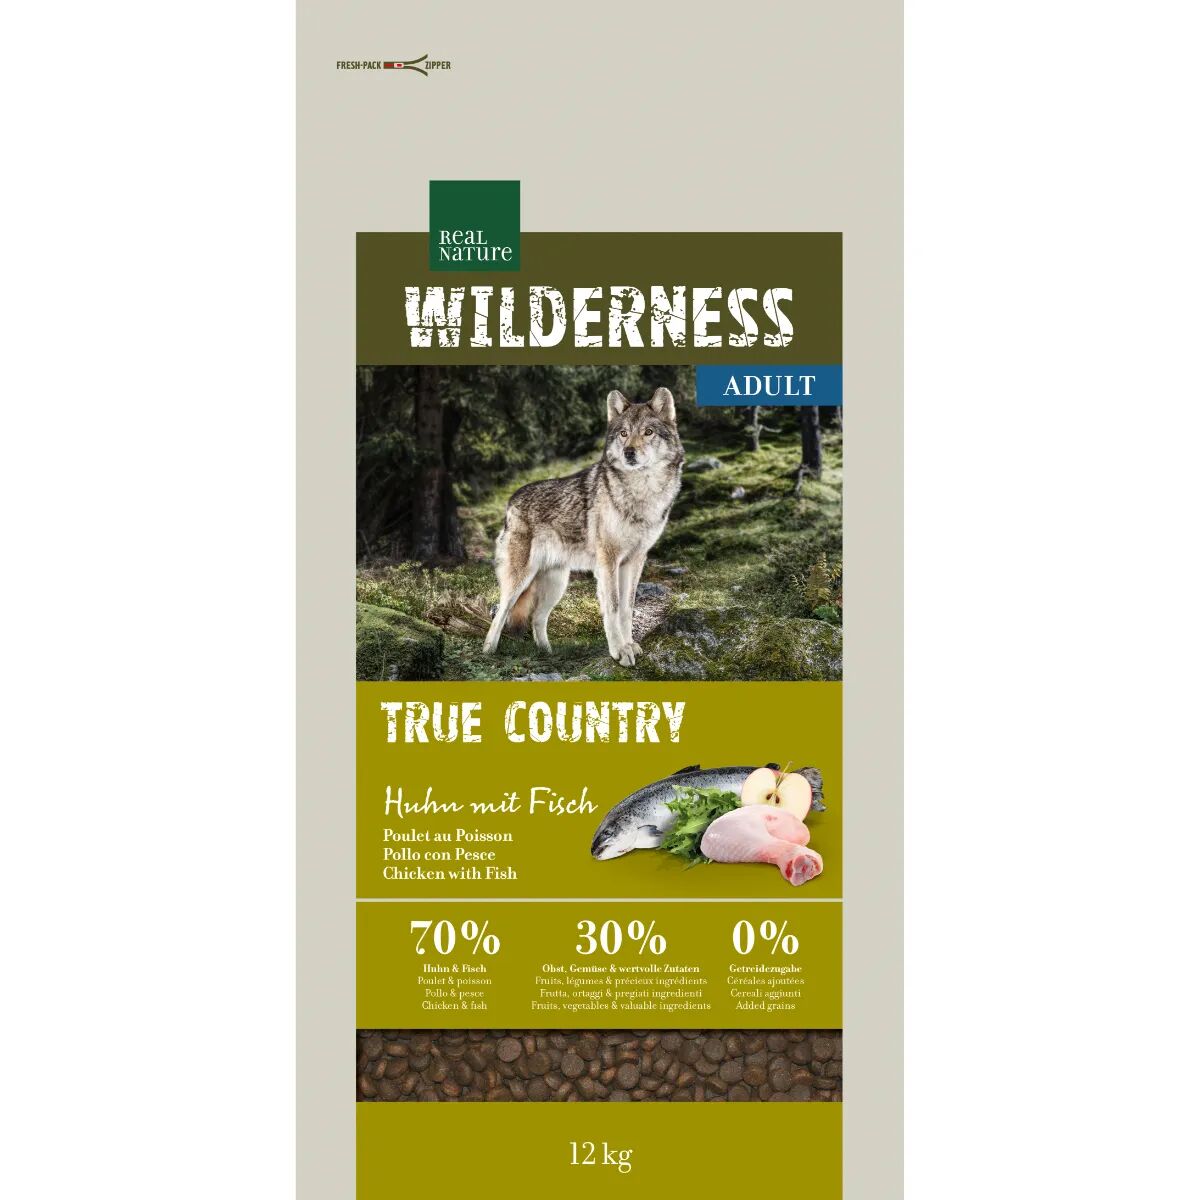 REAL NATURE Wilderness  Cane Adult Pure Country 12KG